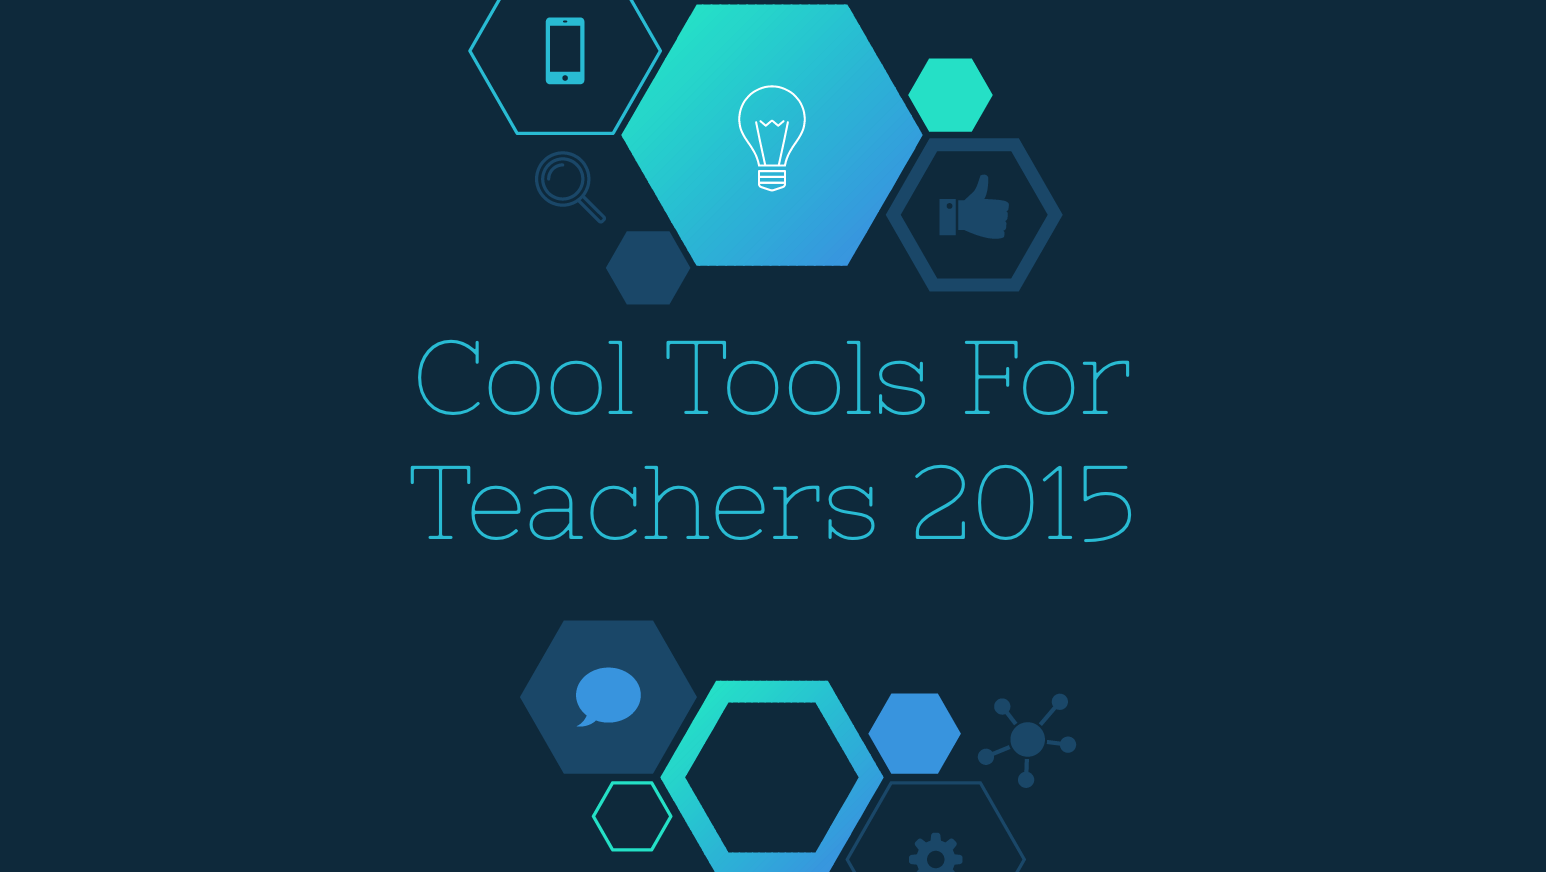 Wednesday Workshop – Cool Tools For Teachers 2015